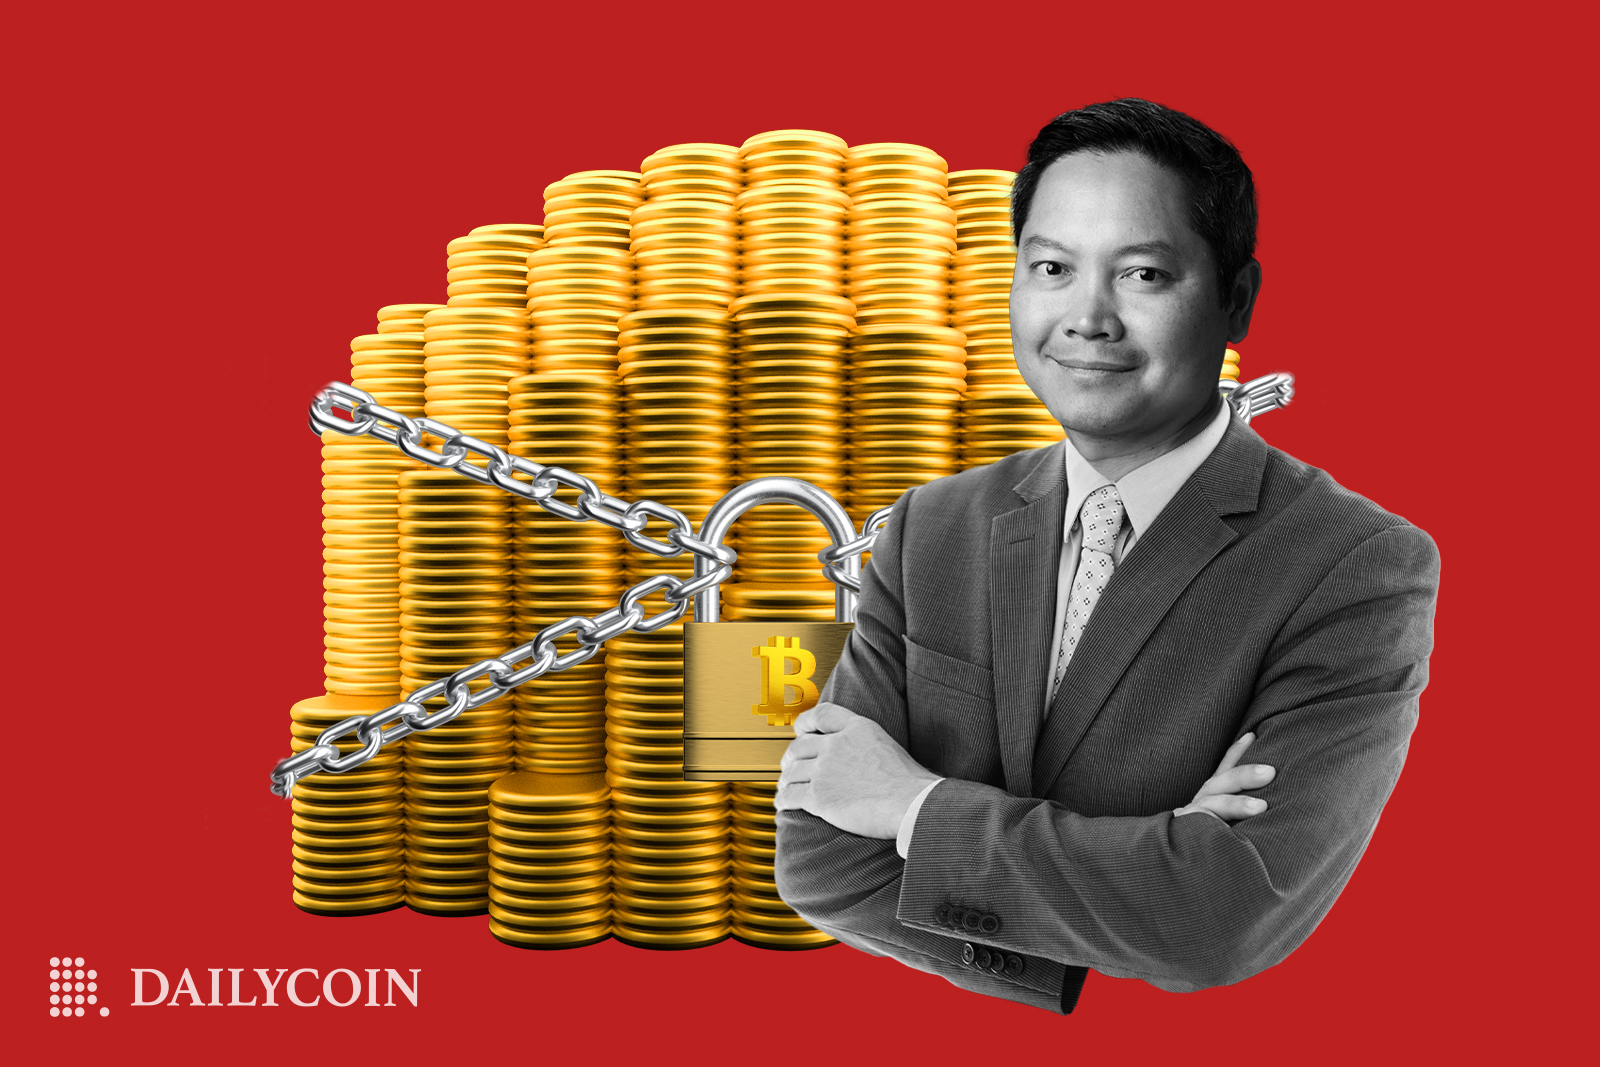 Microstrategy's Phong Lee stands with his arms crossed in front of piles of bitcoins. The piles are chained and padlocked